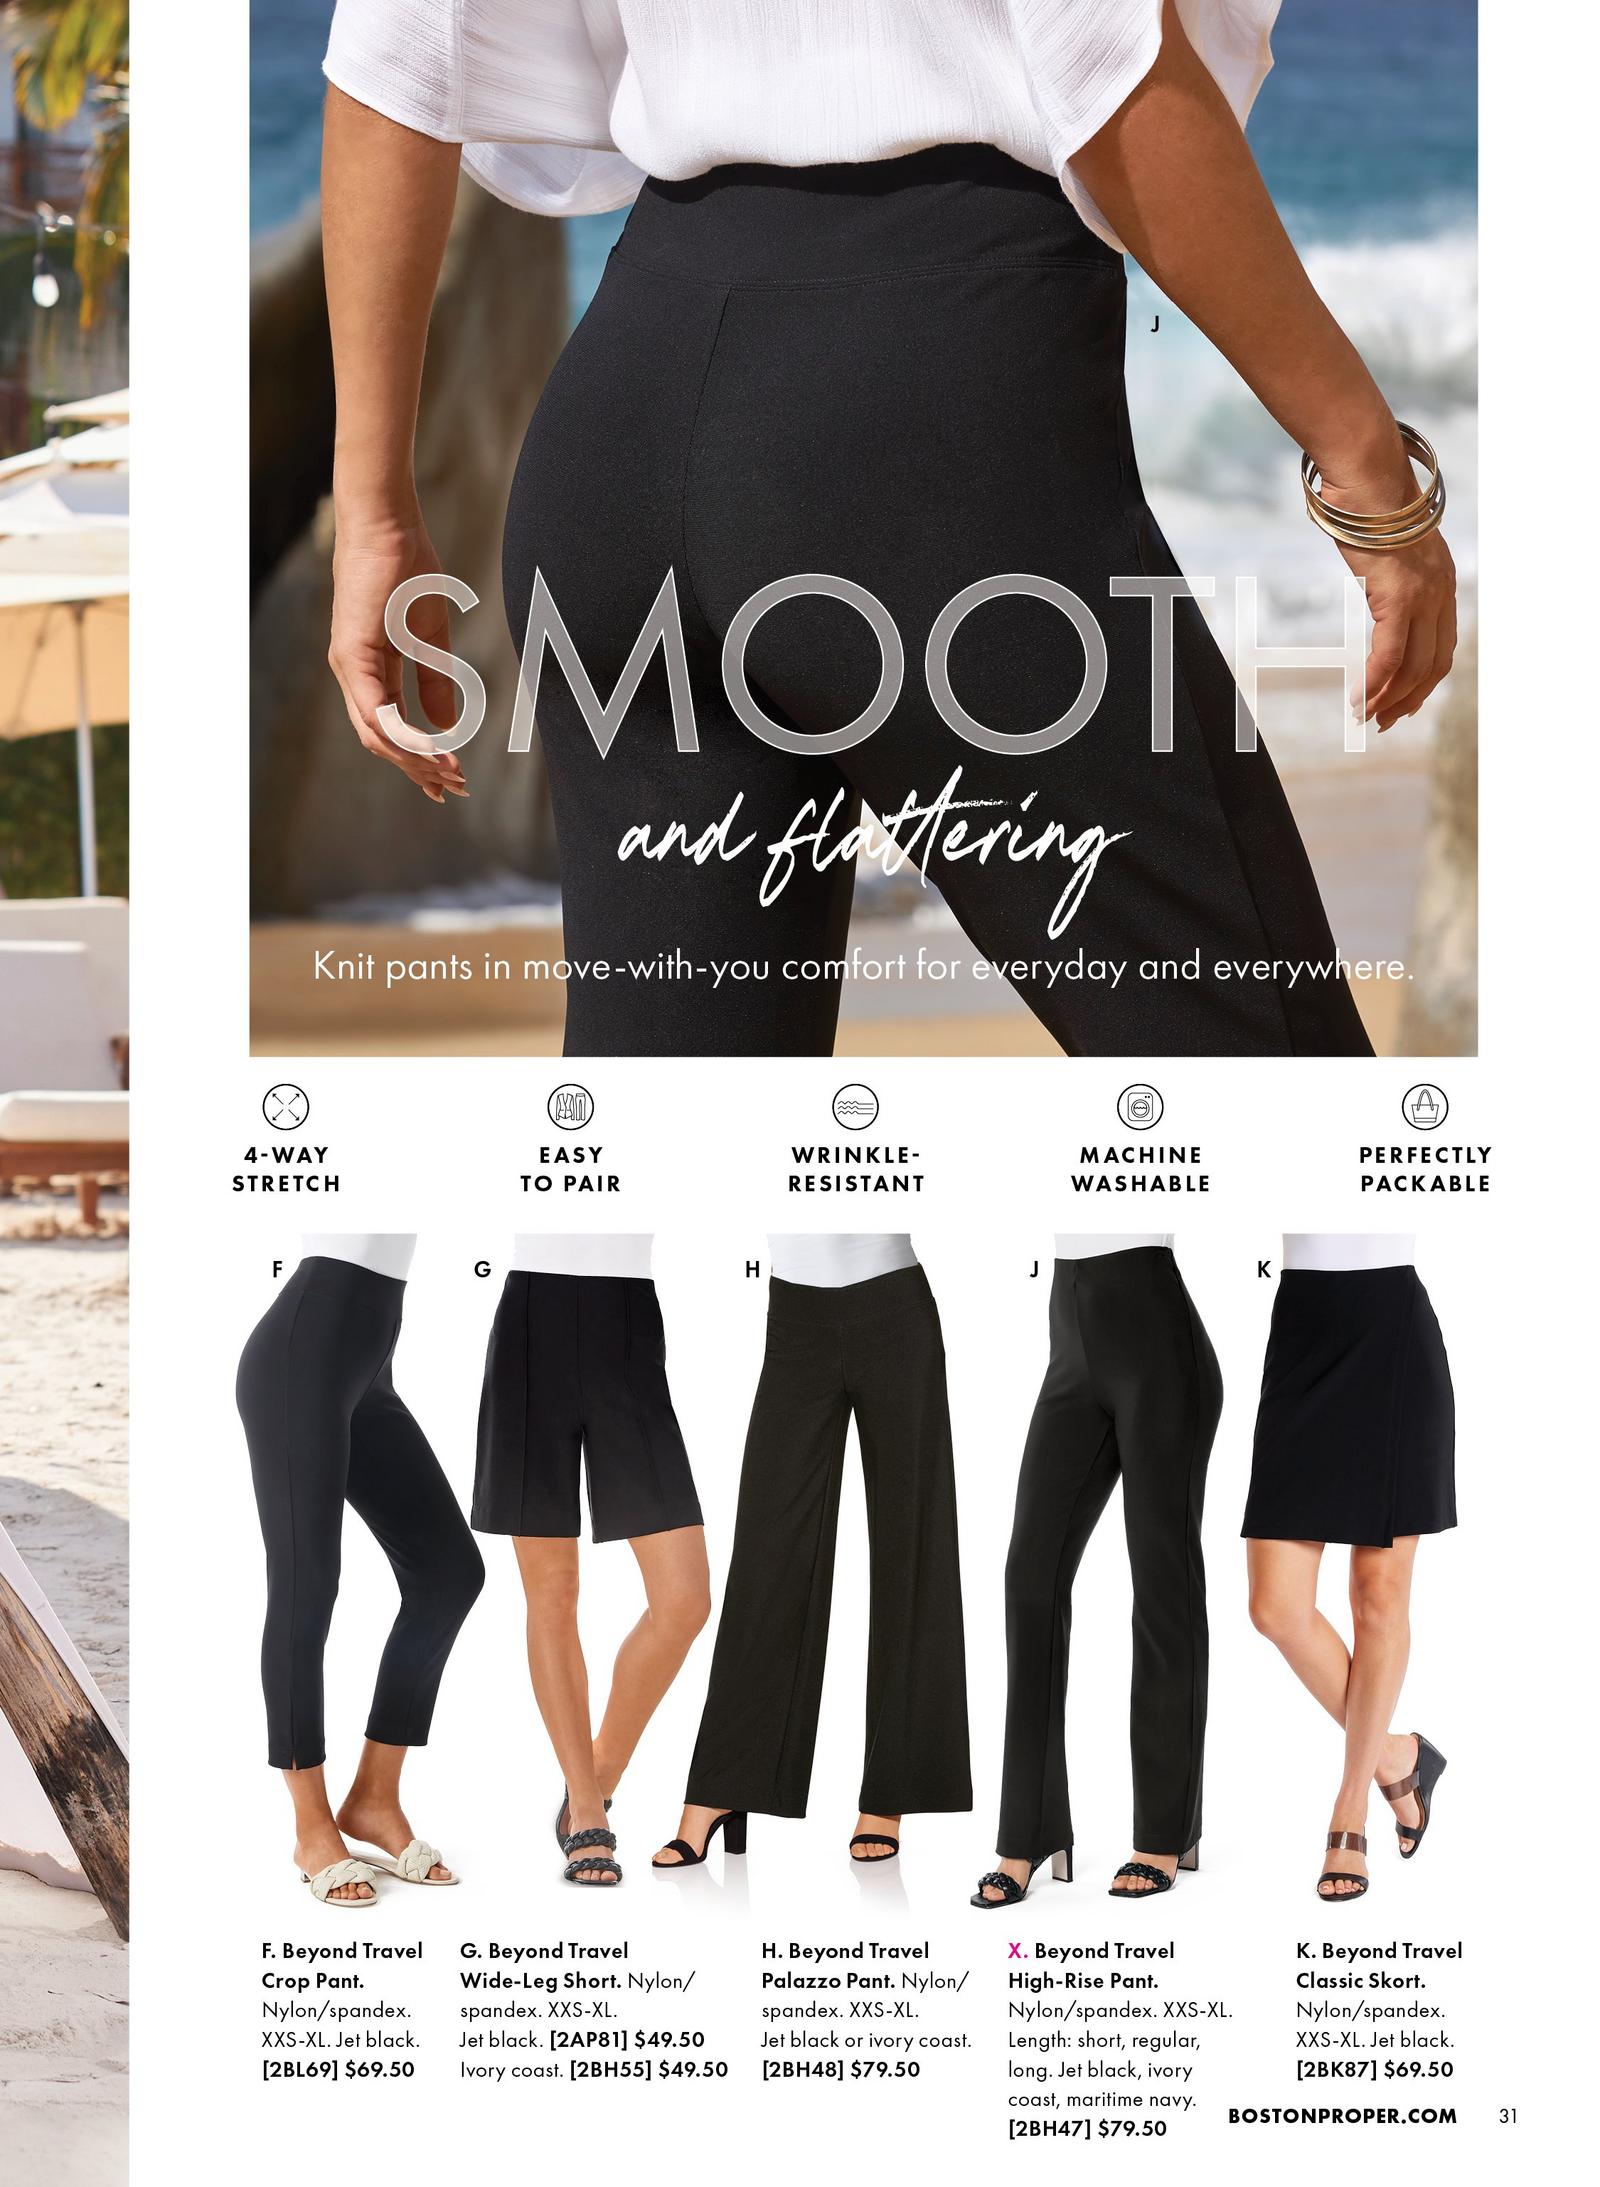 Models wear the Beyond Travel High Rise Pant in black, Beyond Travel Crop Pant in black, Beyond Travel Wide-Leg Short in black, Beyond Travel Palazzo Pant in black and the Beyond Travel Classic Skort in black to smooth curves and elongate lines.